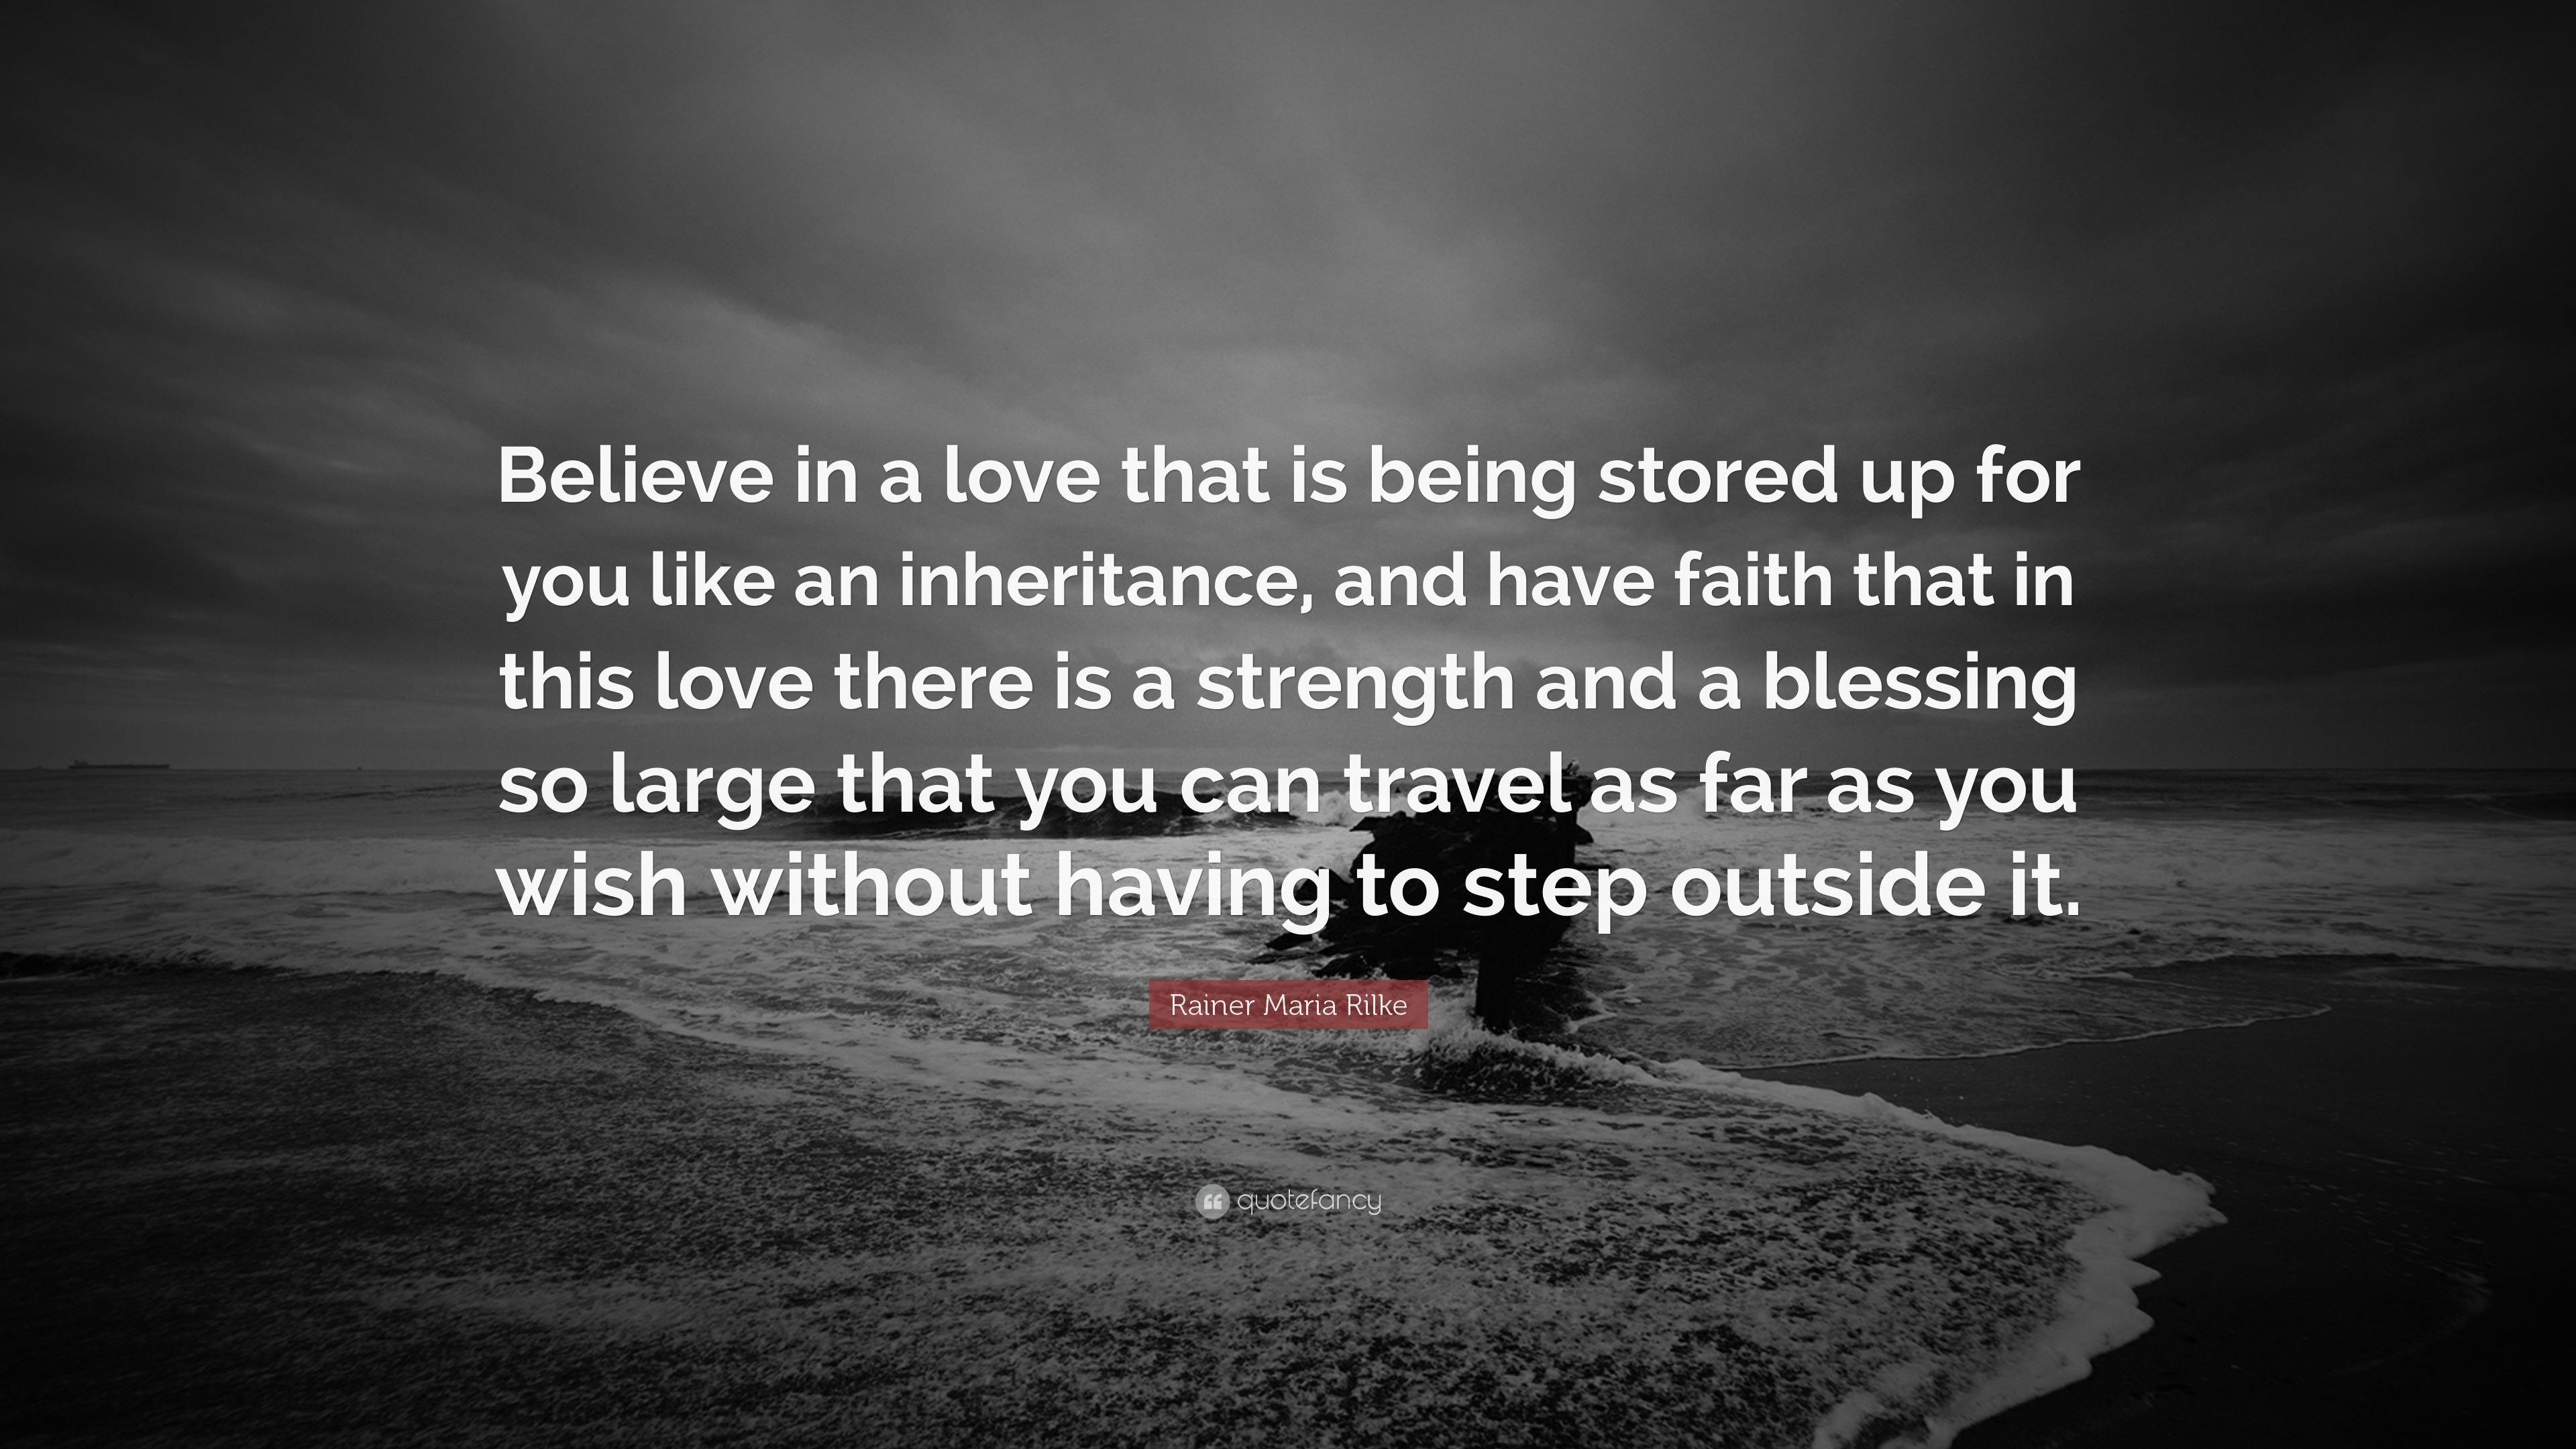 Rainer Maria Rilke Quote “Believe in a love that is being stored up for